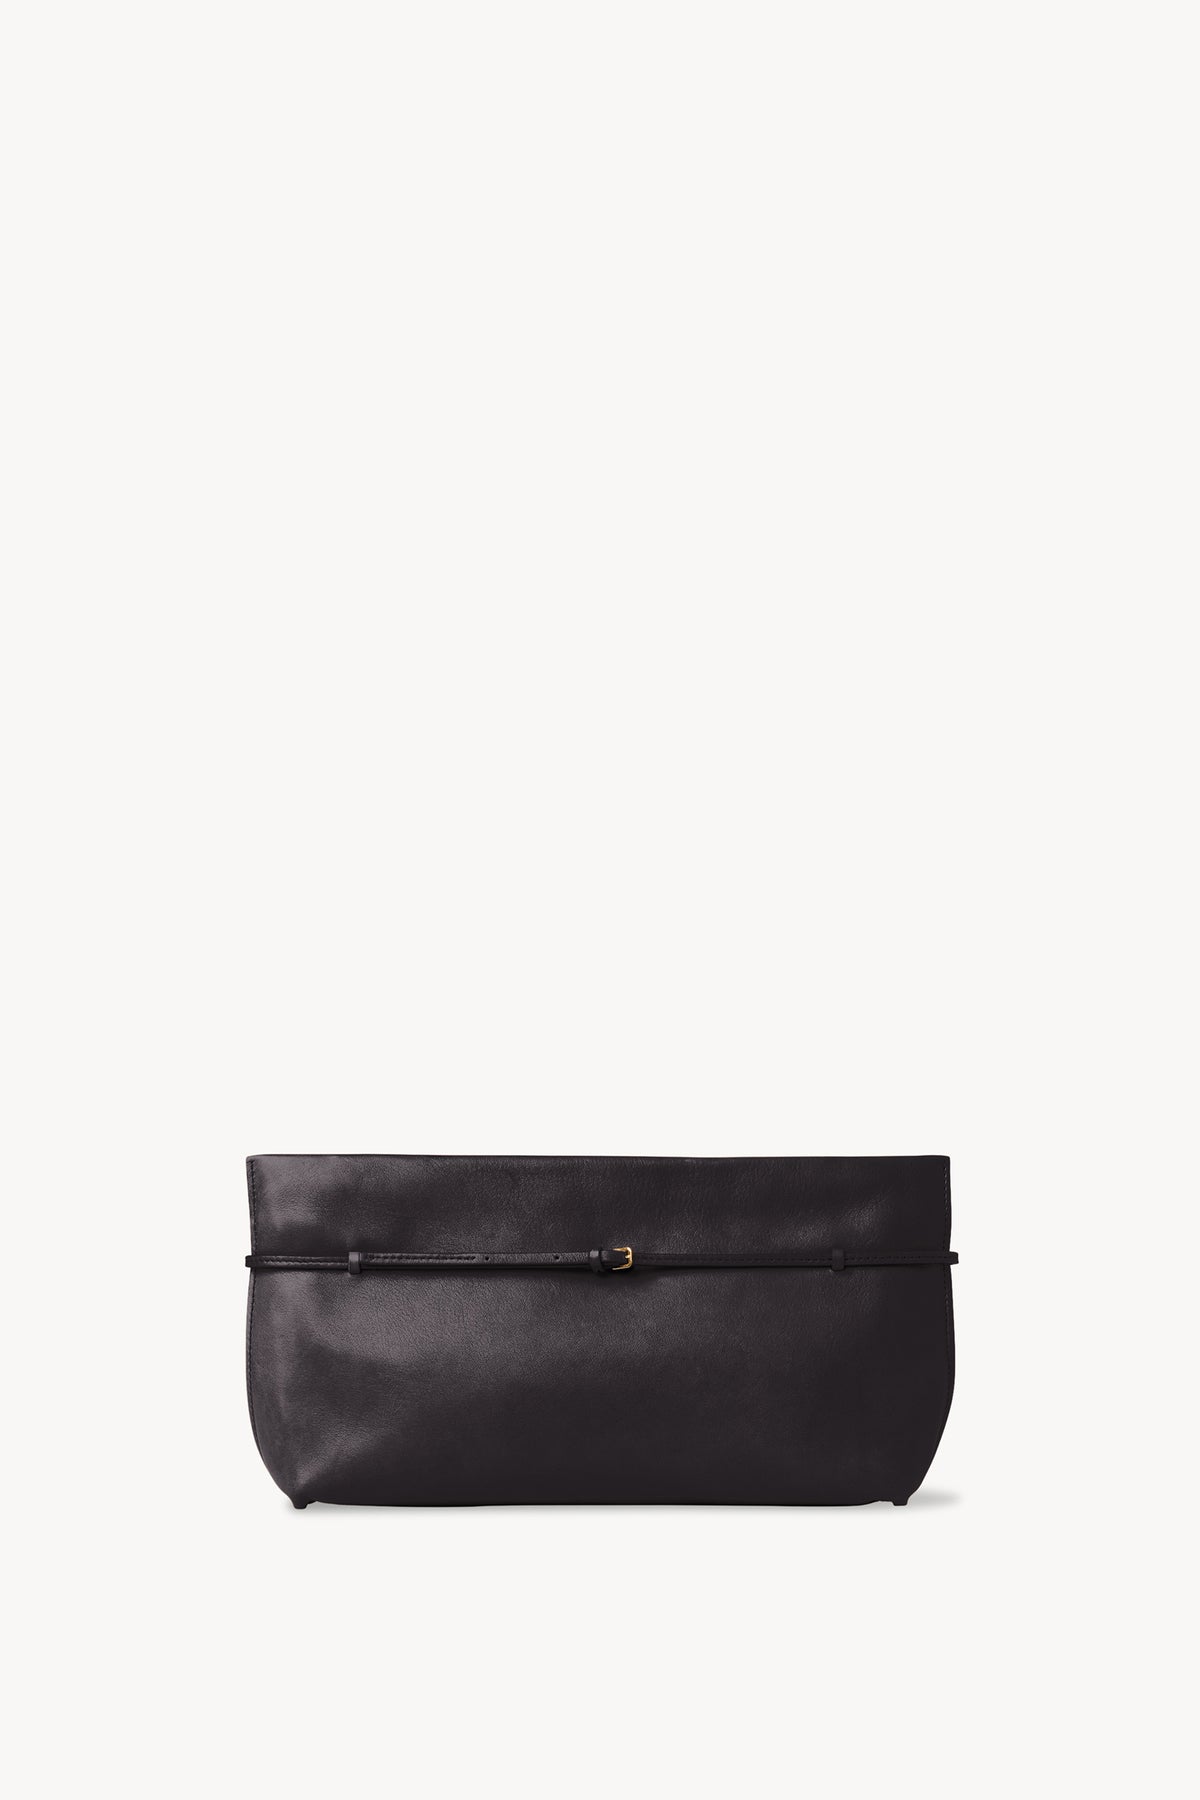 Sienna Clutch in Leather